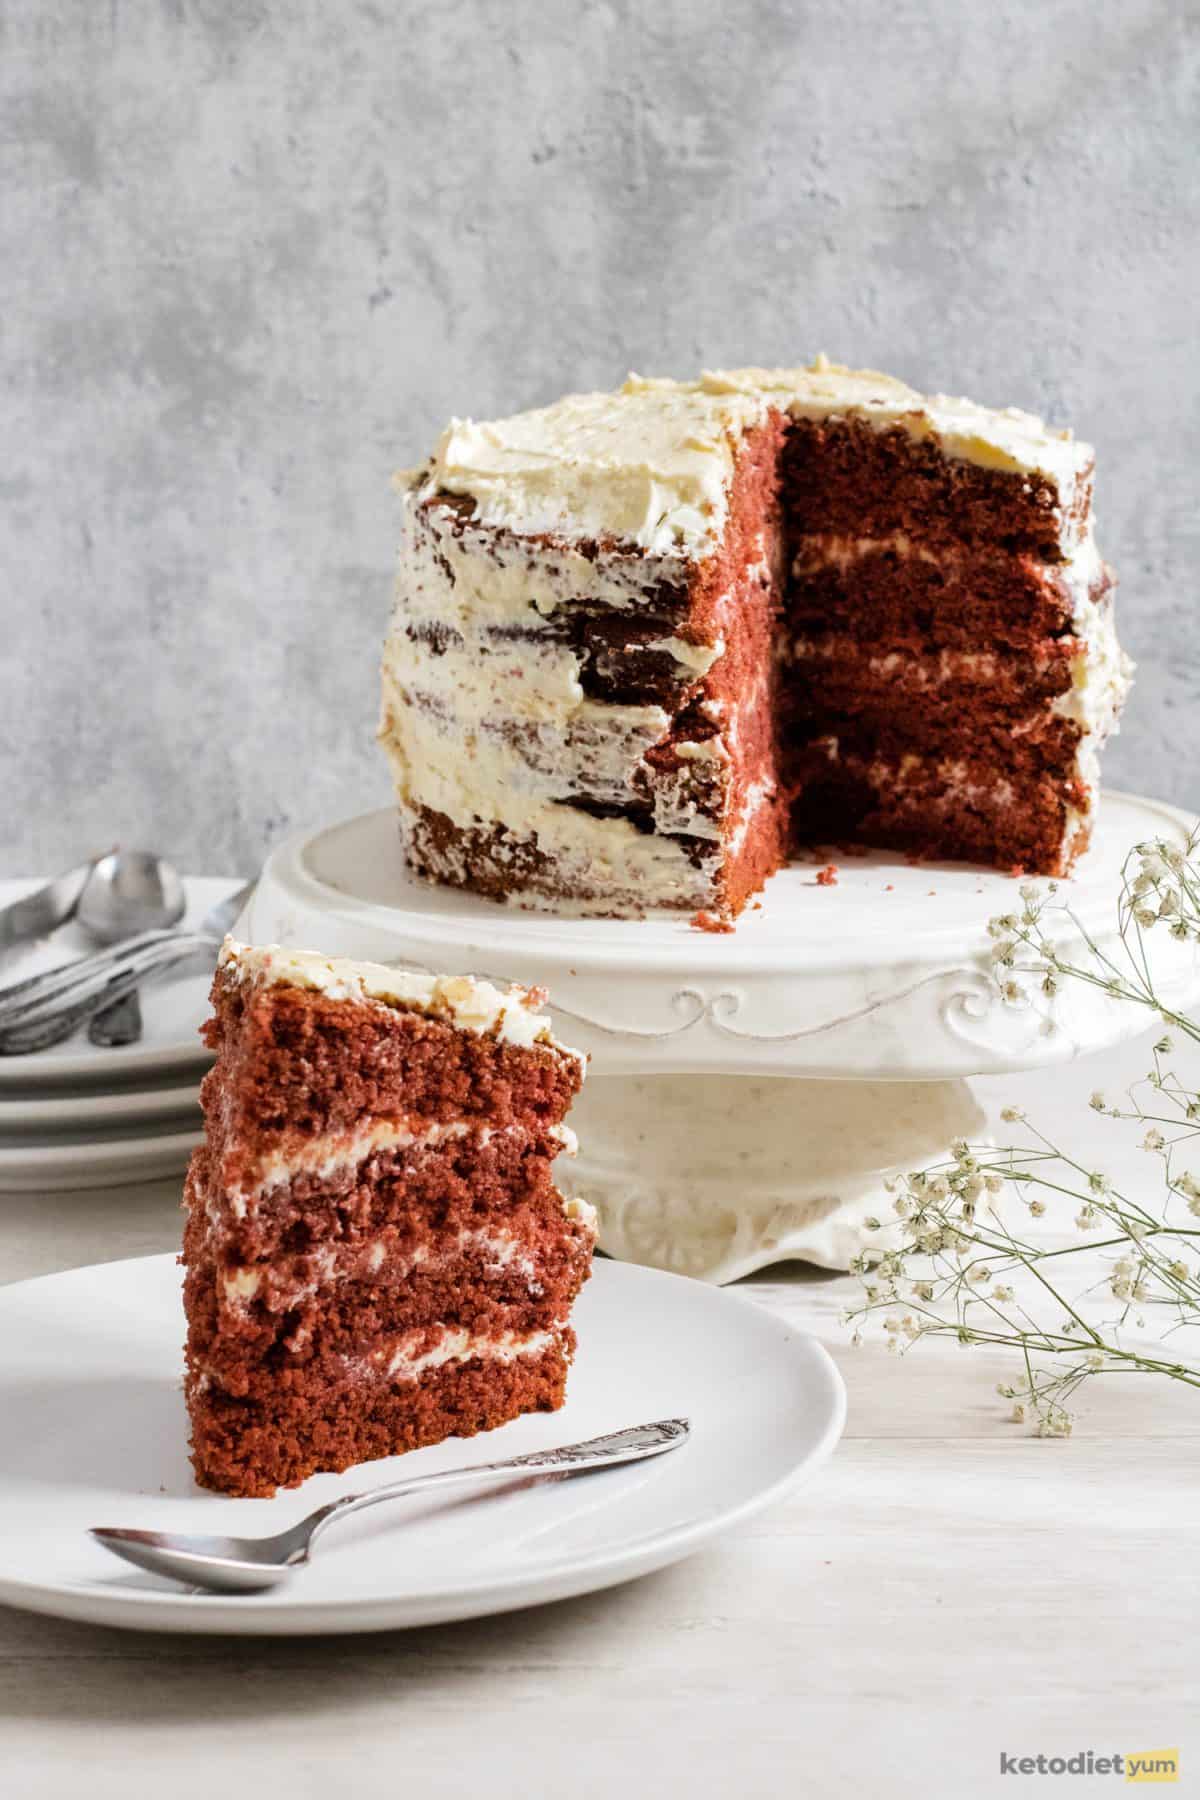 A slice of keto red velvet cake with cream cheese frosting with the full cake in the background